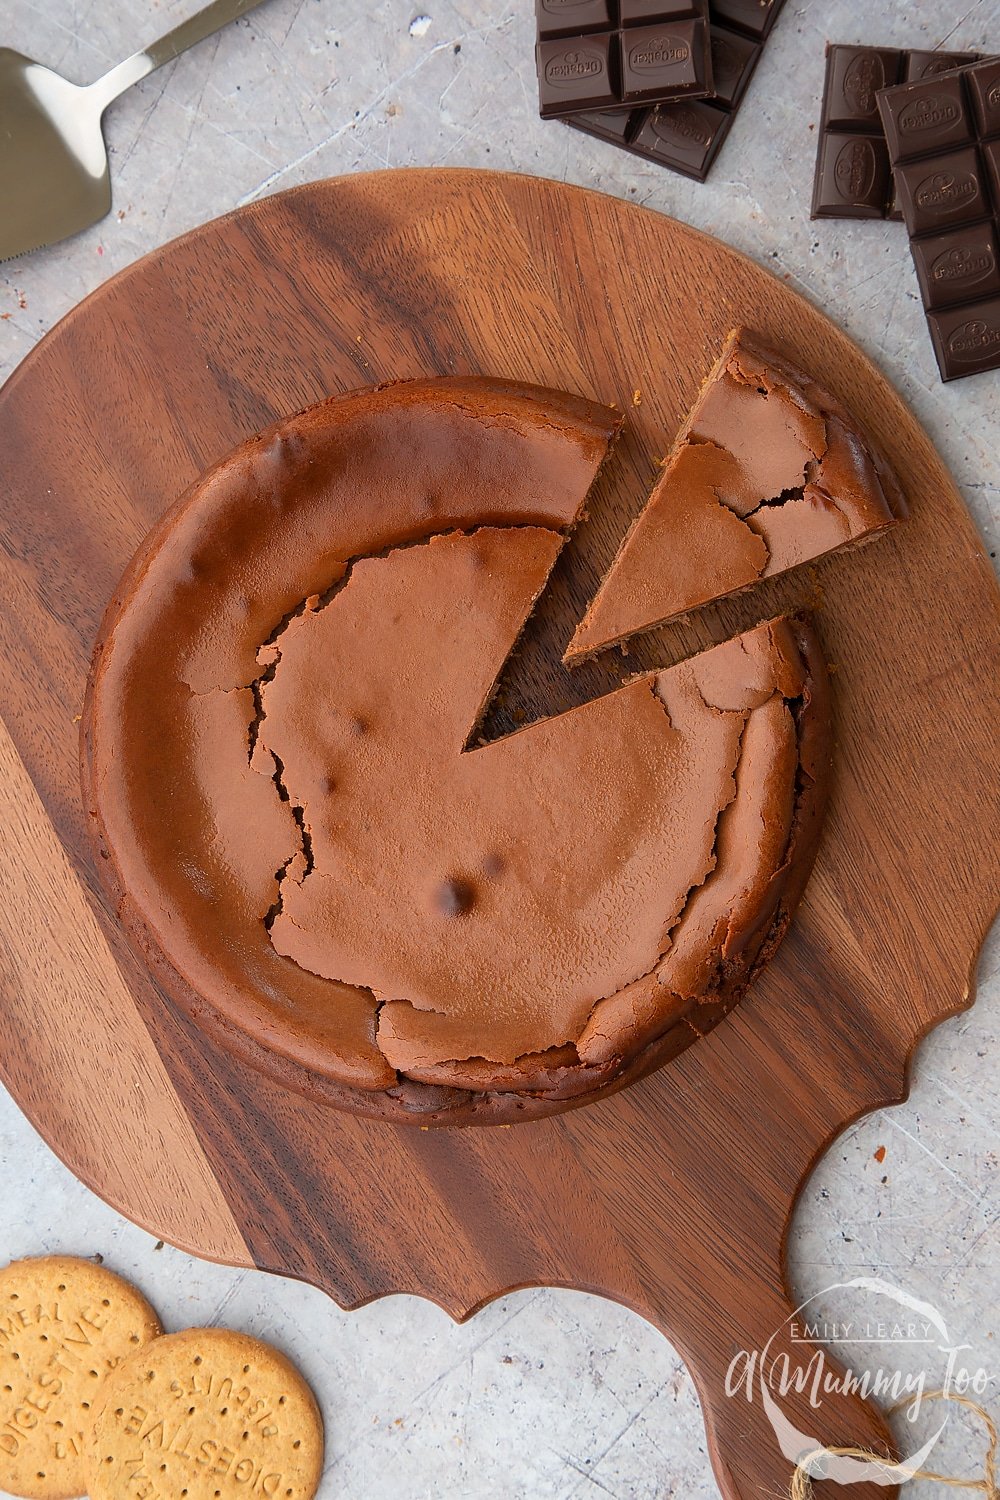 Overhead shot of the baked chocolate cheesecake with a slice already cut. The cheesecake sits on a wooden board surrounded by dark chocolate. 